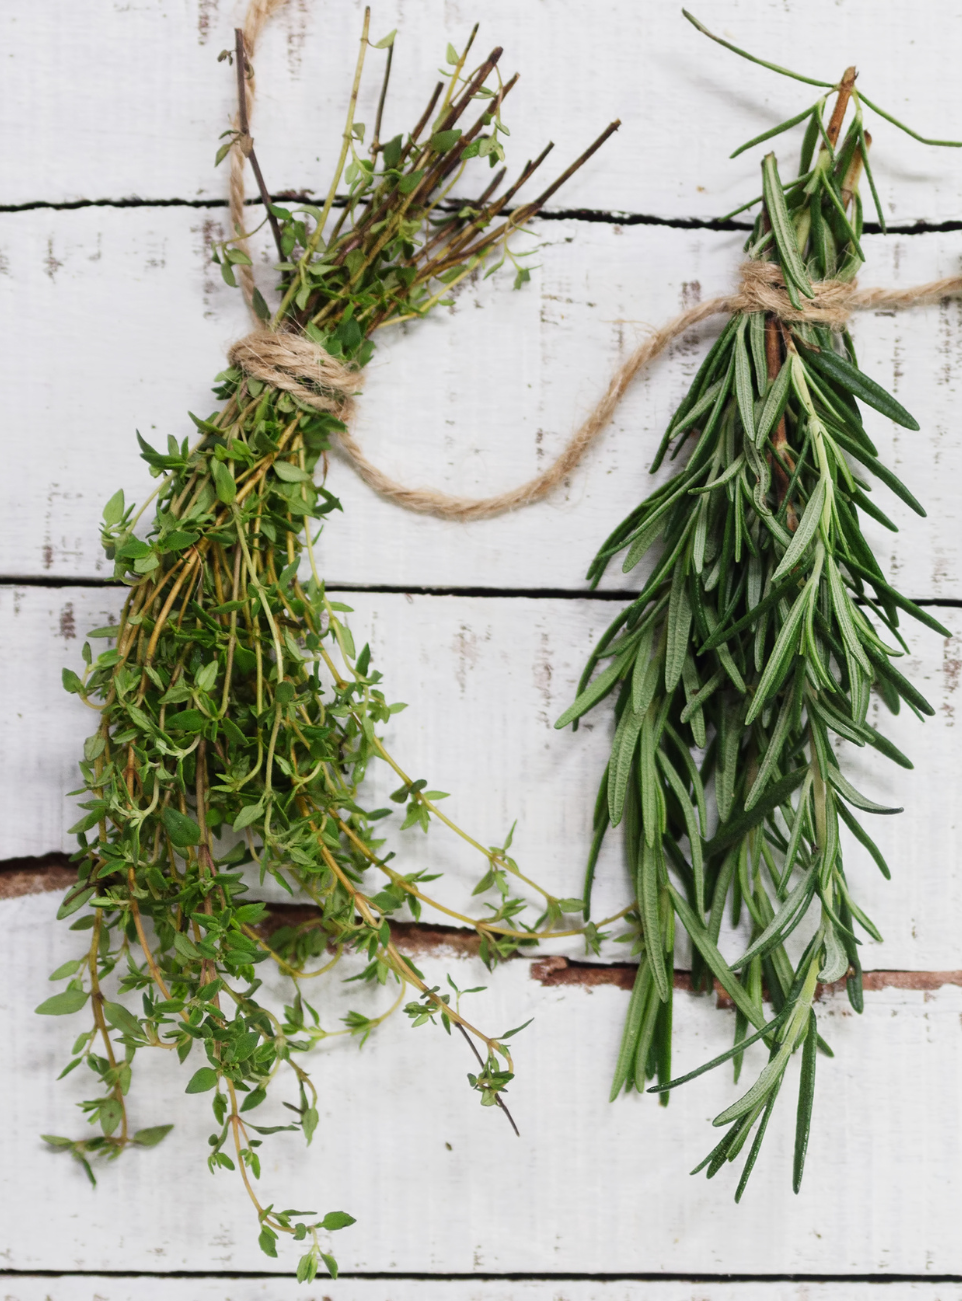 Thyme and rosemary drying upside down